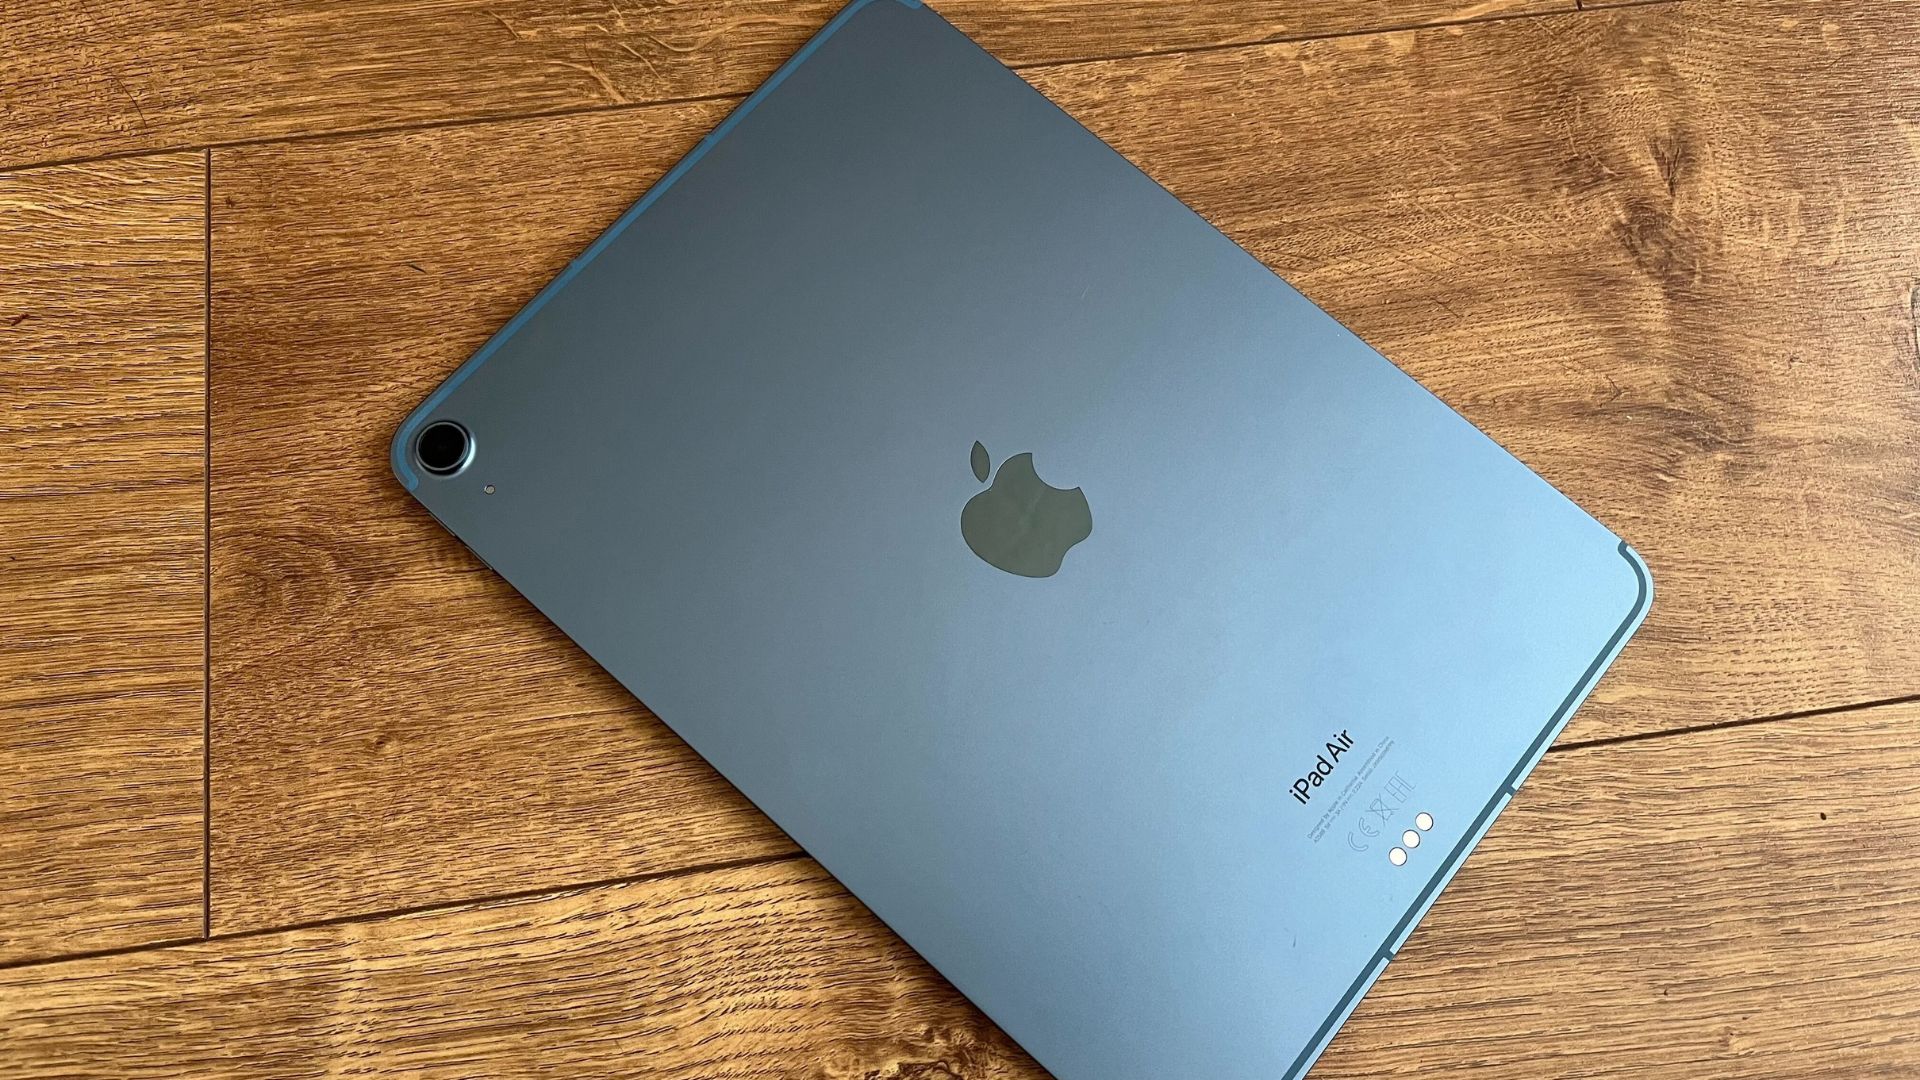 One of the best iPads, the iPad Air, in black lay on its screen on a wood surface. We see its back, showing the Apple logo in the centre and small single camera ring in the top right corner.